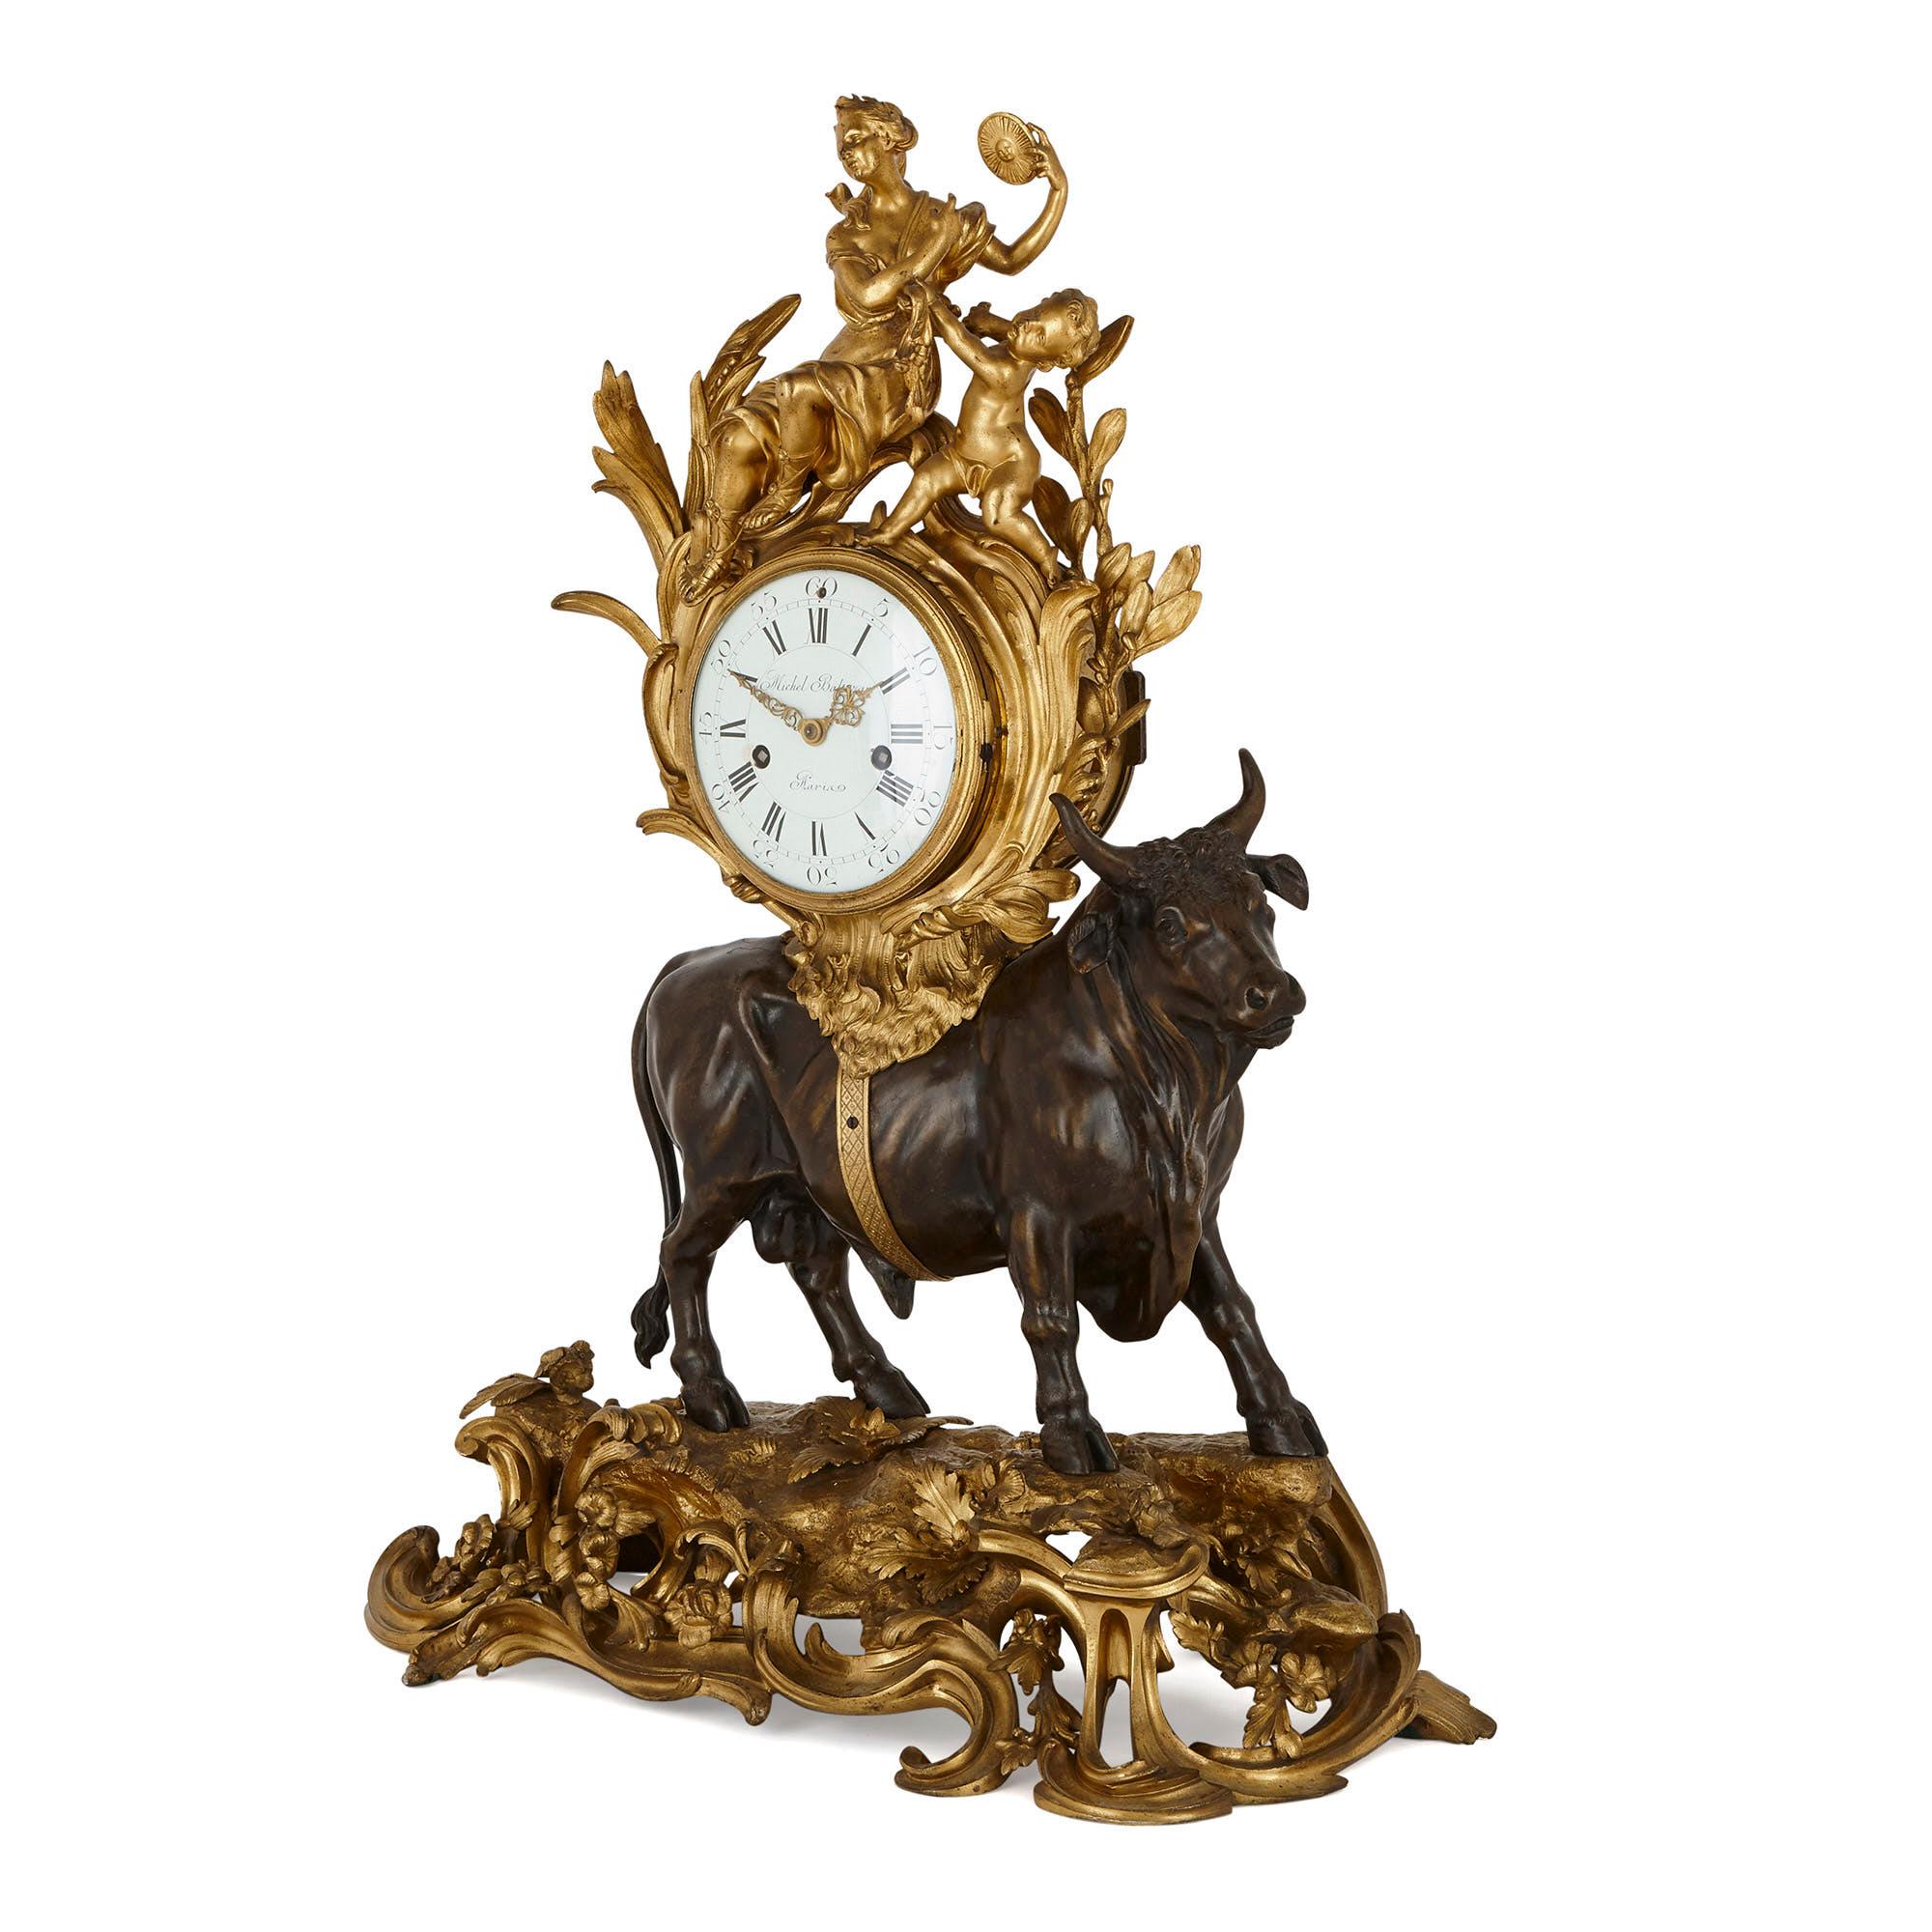 This mantel clock beautifully illustrates the classical myth of ‘The Abduction of Europa’. In this story, the god Zeus falls in love with a mortal woman called Europa. To seduce her, Zeus transforms himself into a white bull. Europa then mounts the